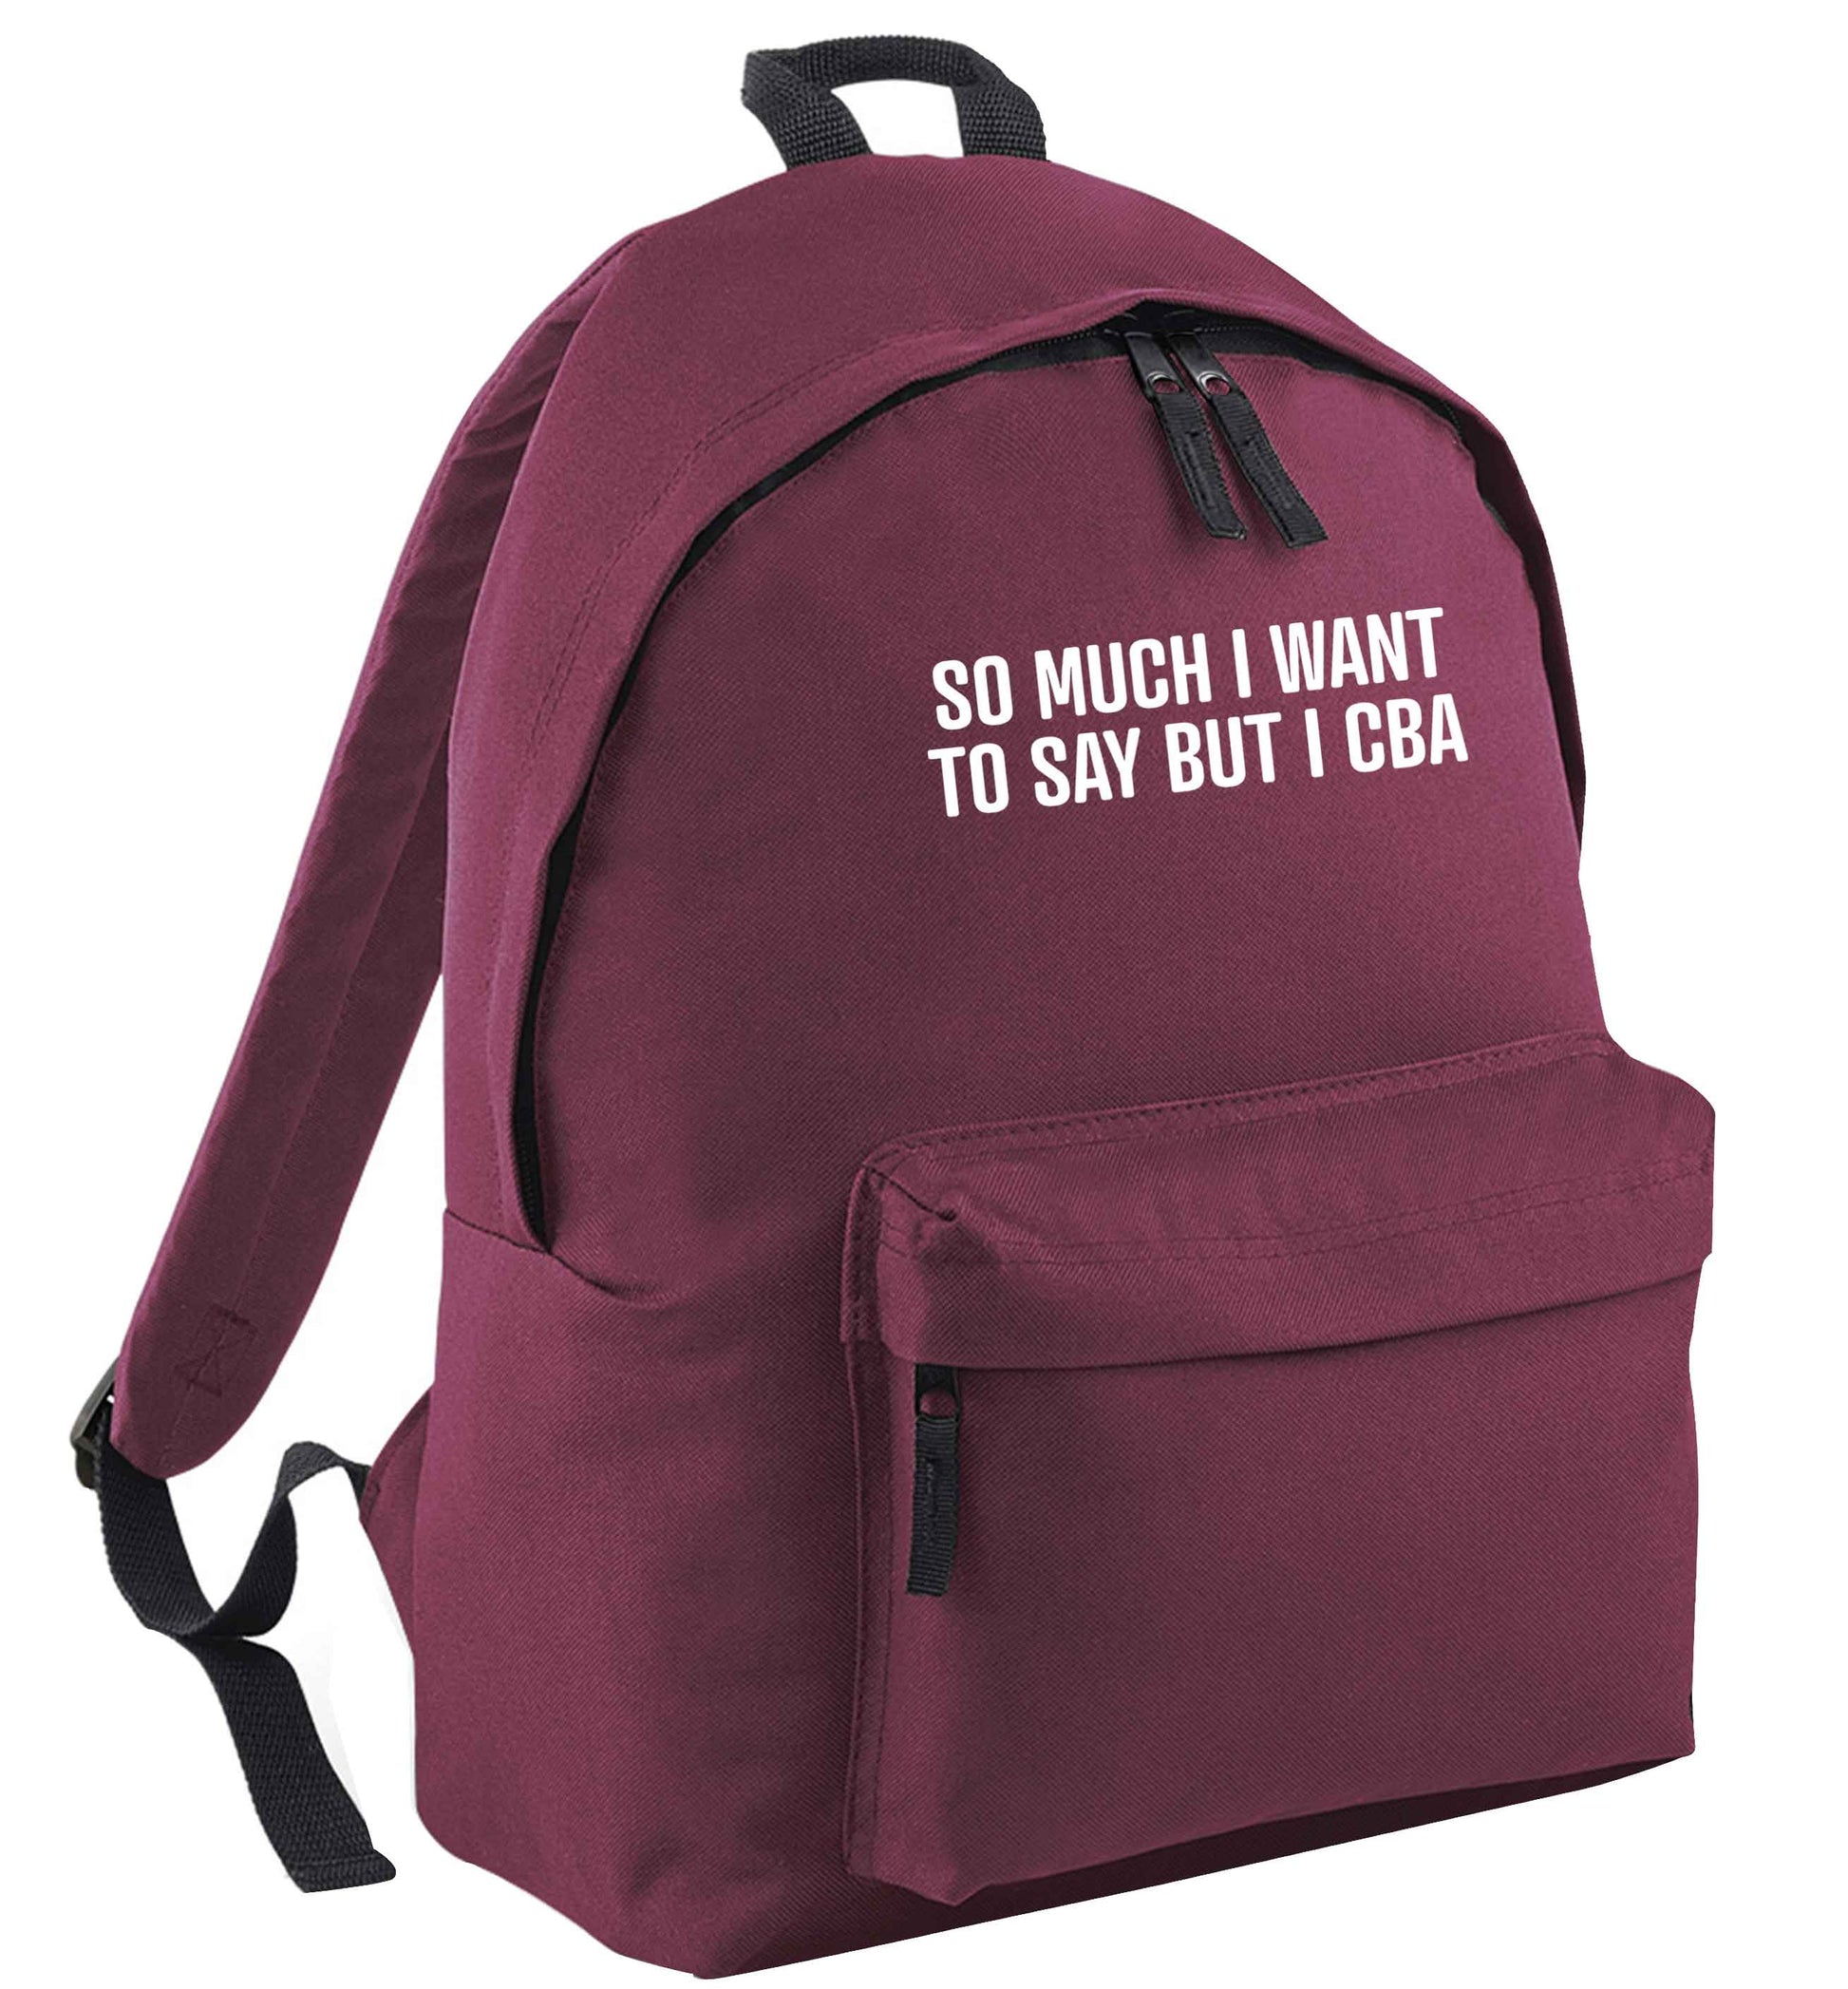 So much I want to say I cba  maroon adults backpack